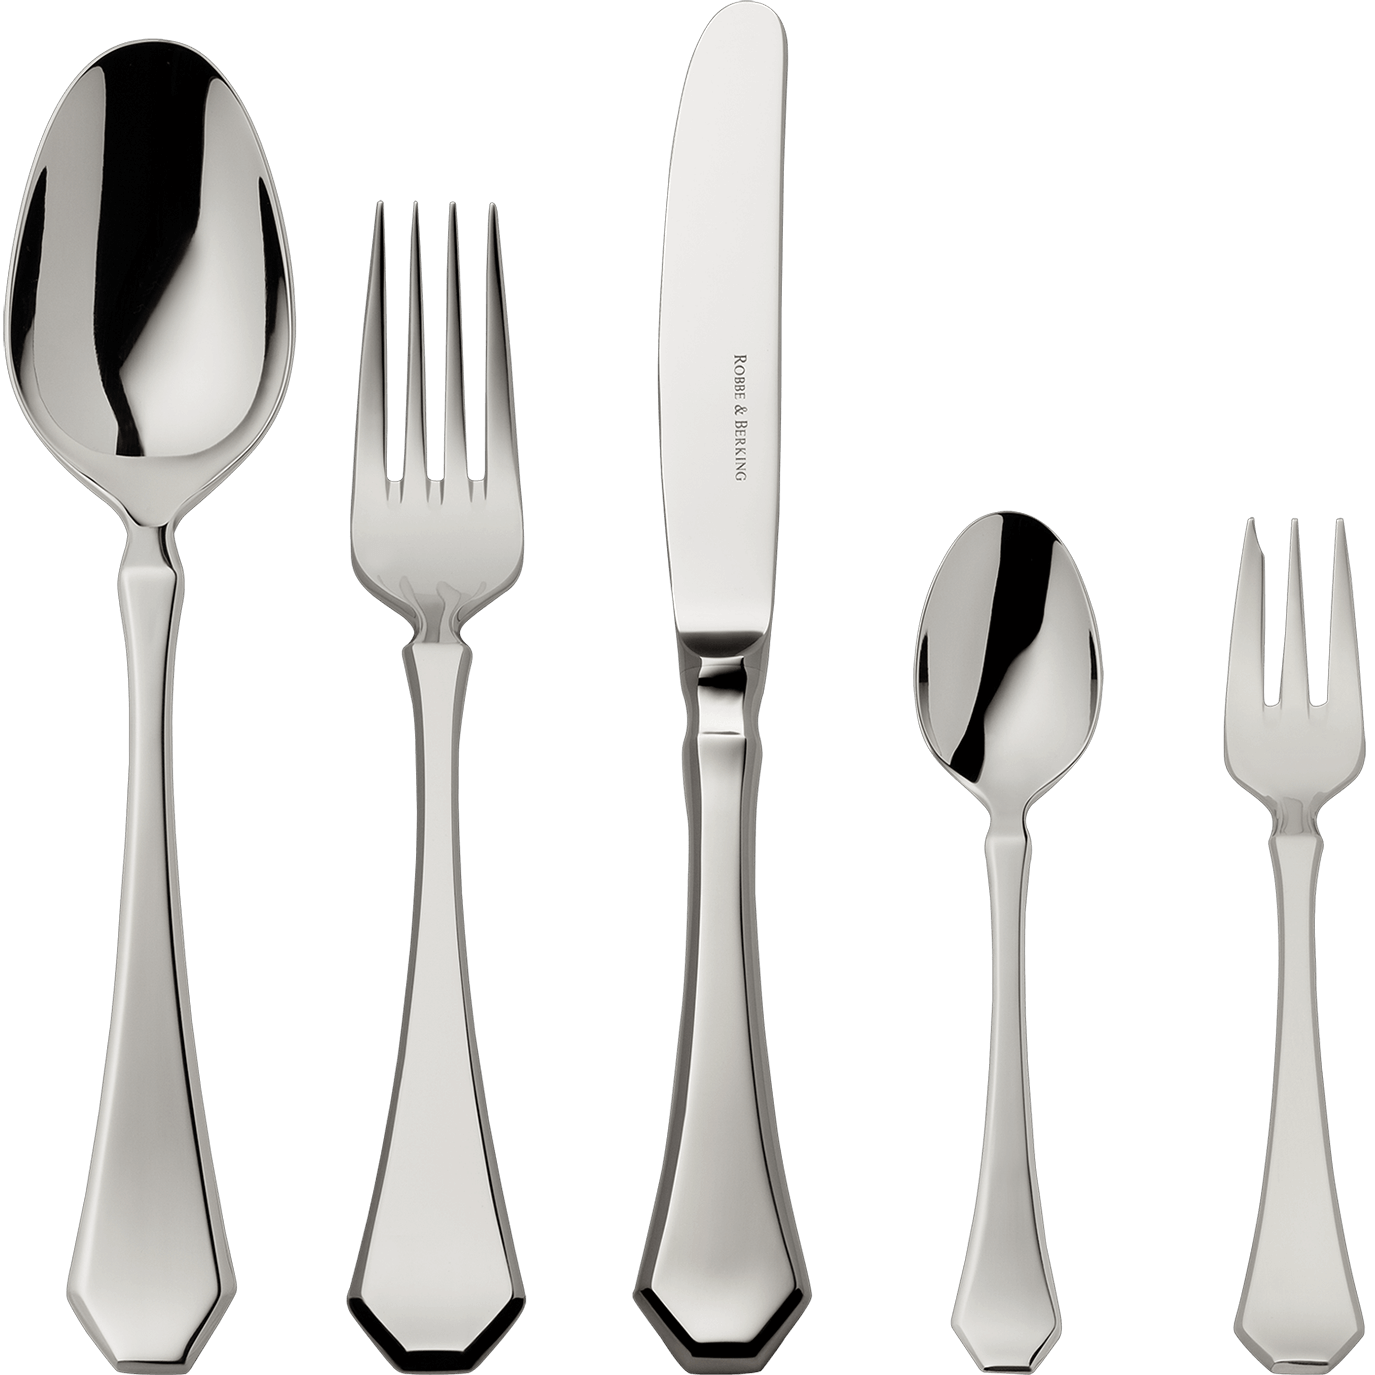 Baltic 30-piece set (18/8 stainless steel)